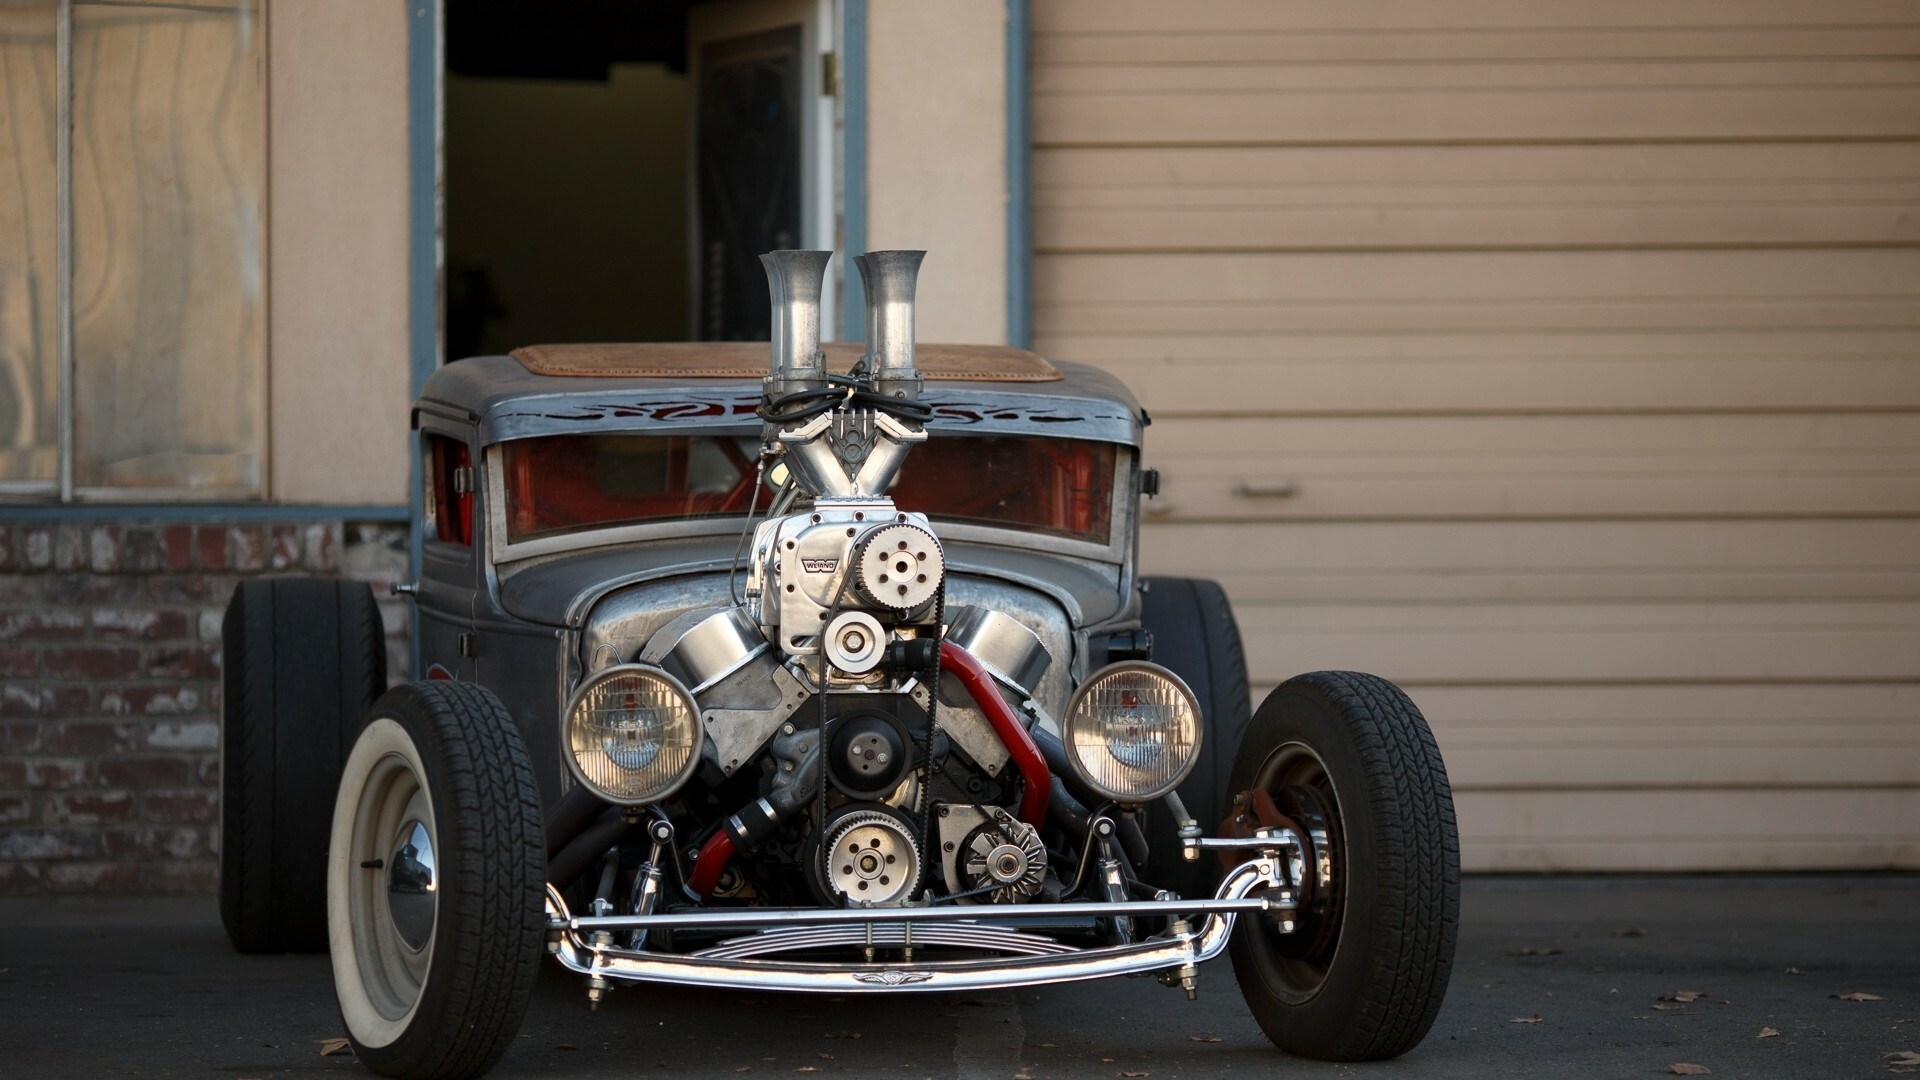 Hot Rod: Rat rods, American cars, A passenger vehicle modified to run faster. 1920x1080 Full HD Wallpaper.